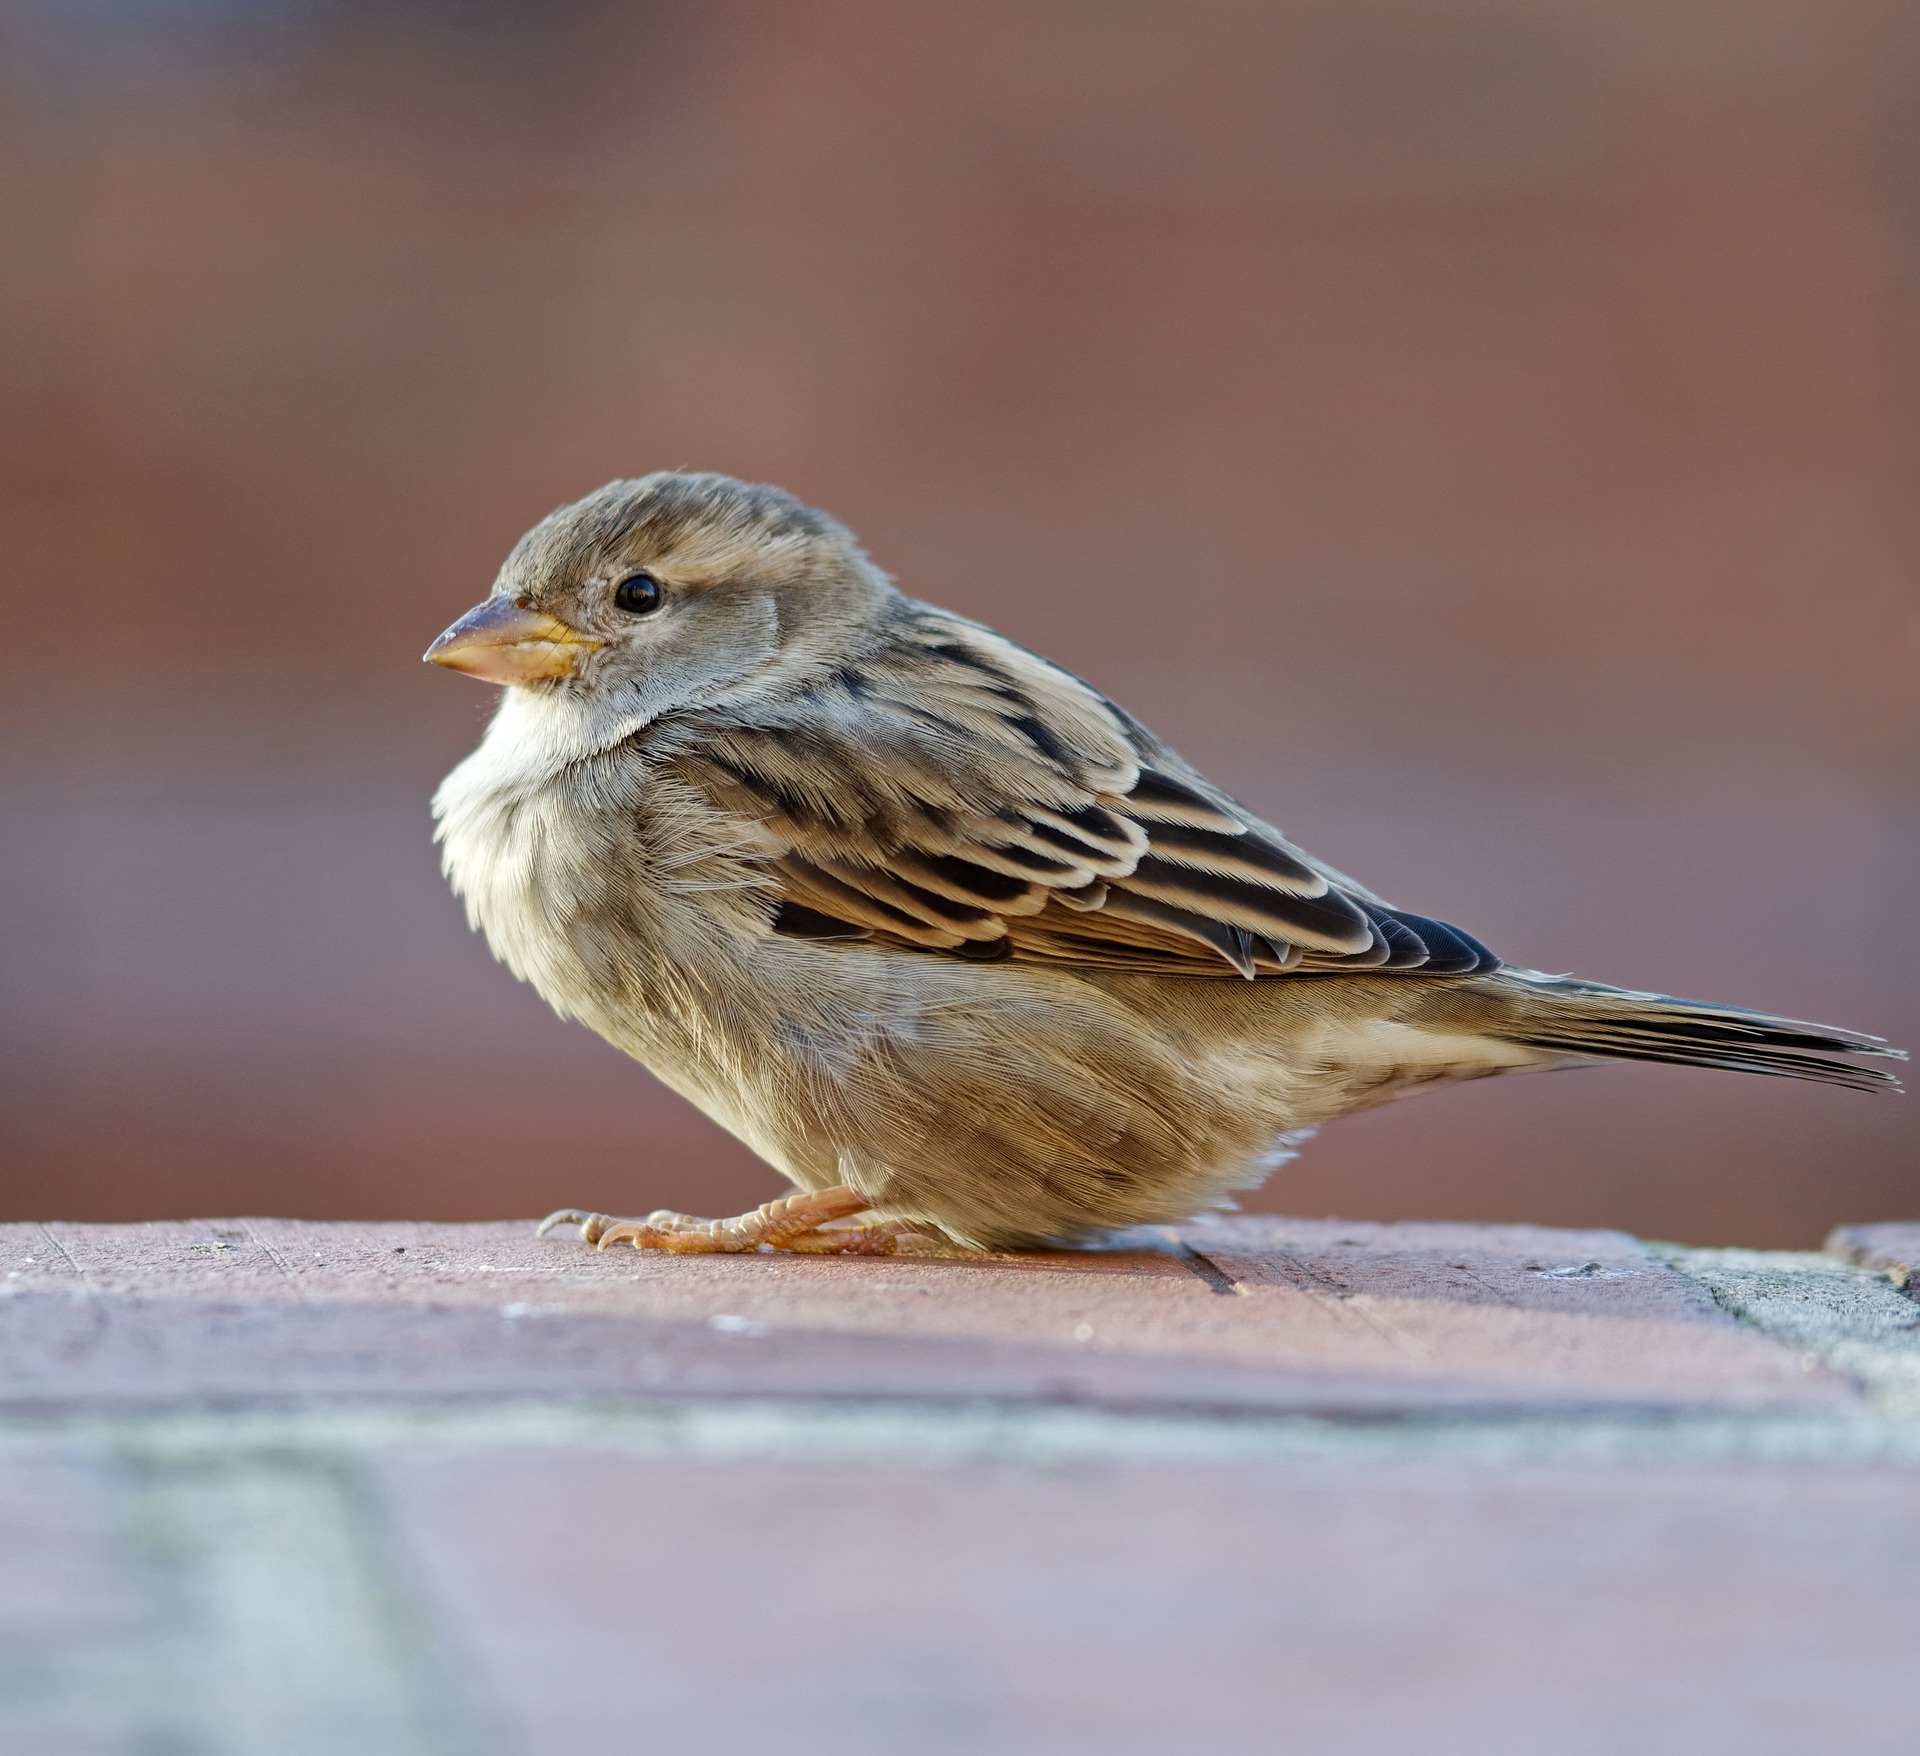 Sparrows, Sproul, Hymns, and Providence